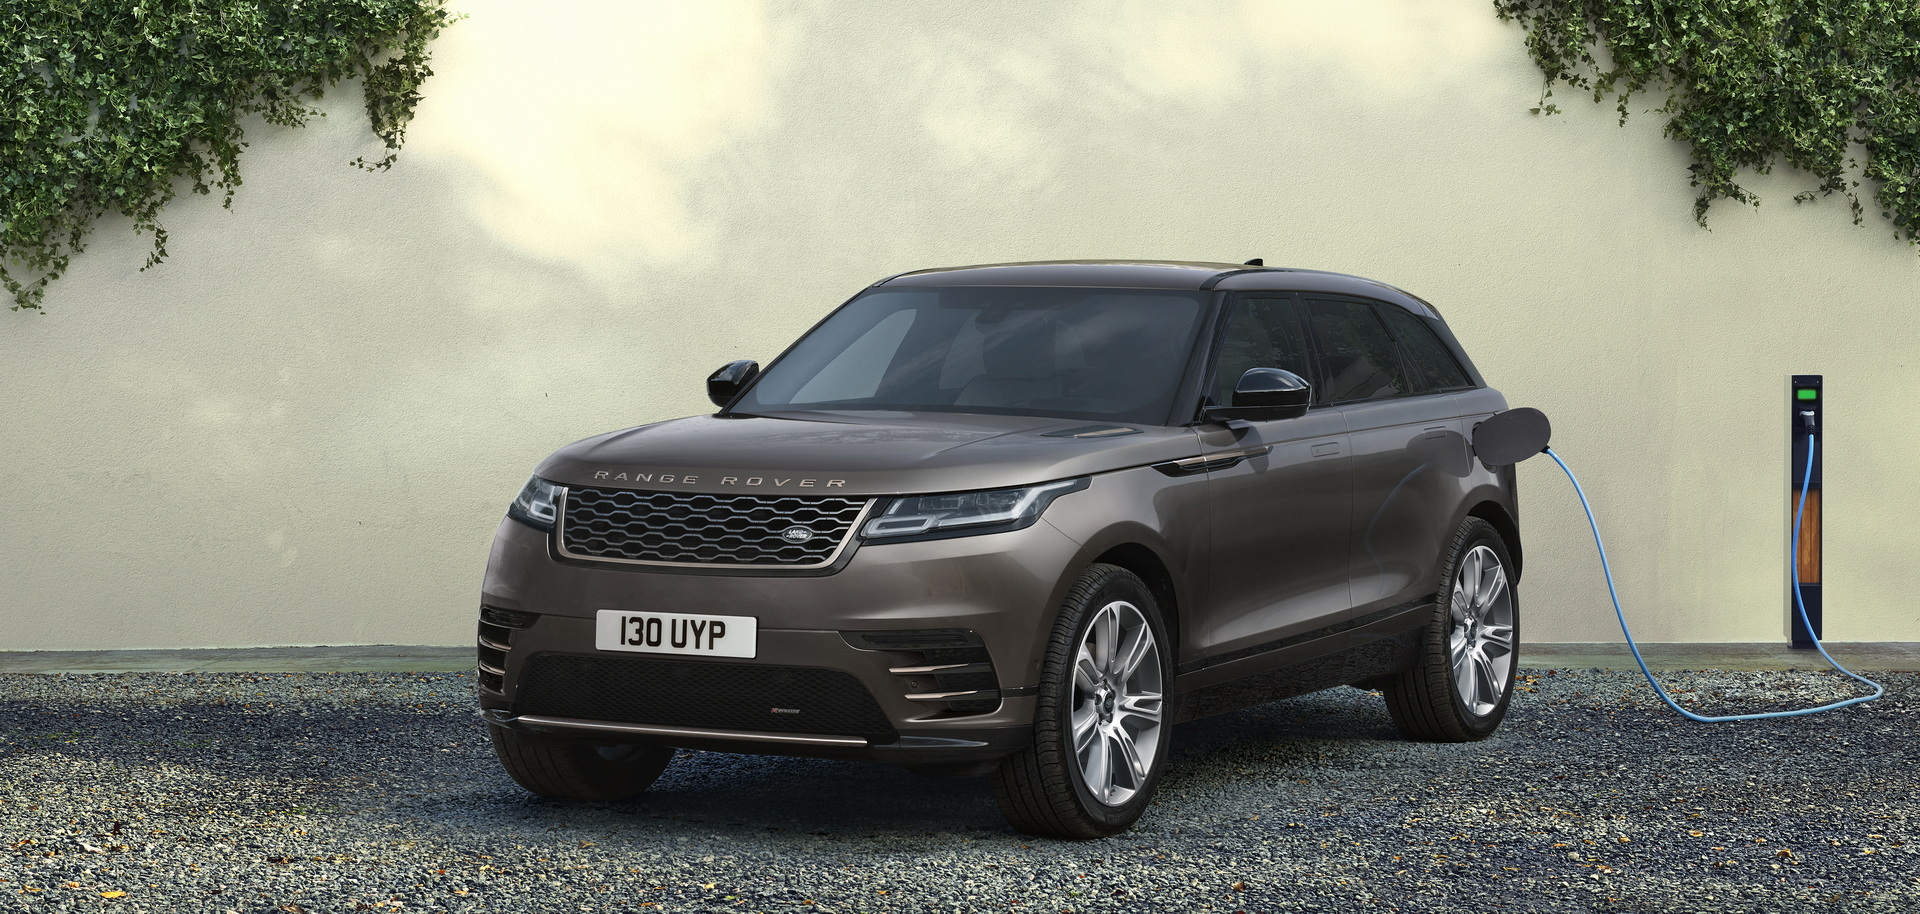 2022 Range Rover Velar Gains New Design Options And Over-The-Air